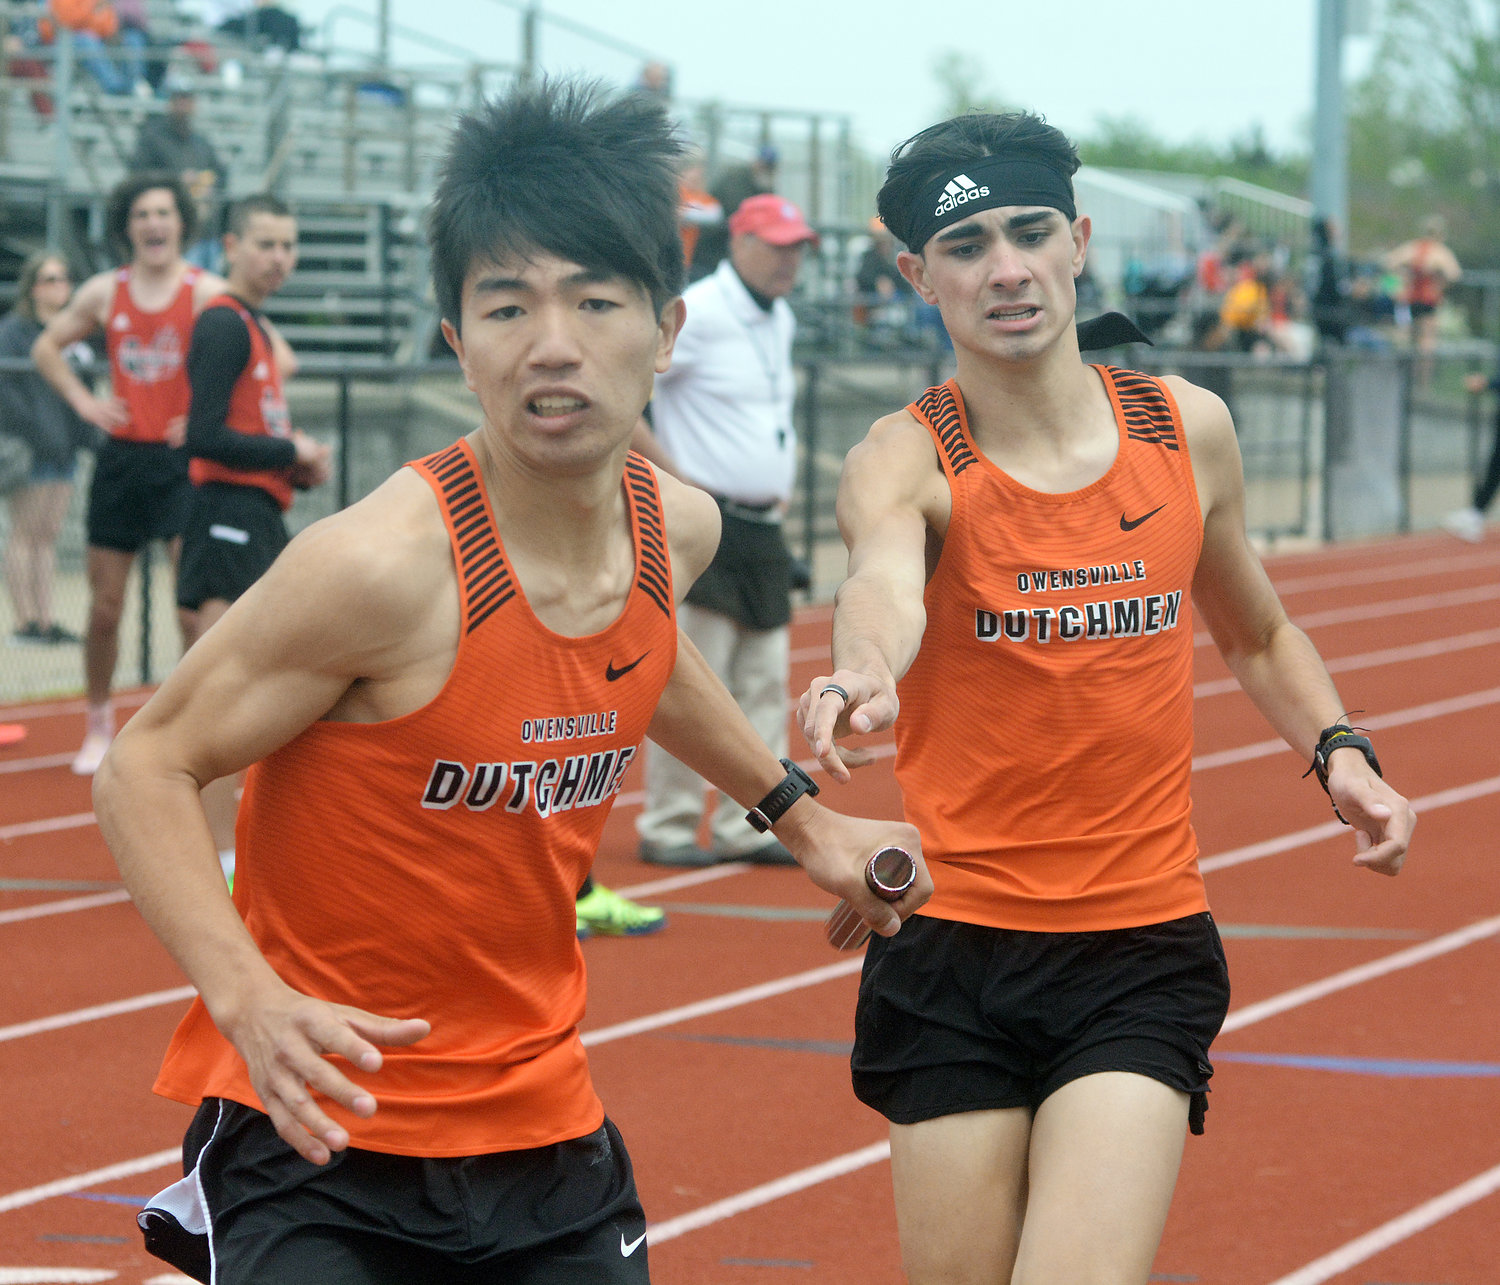 Freddy Zheng (left) grabs the baton from Lucas Morgan during the varsity boys 4x800m relay in Monday’s FRC track meet at Dutchmen Field.